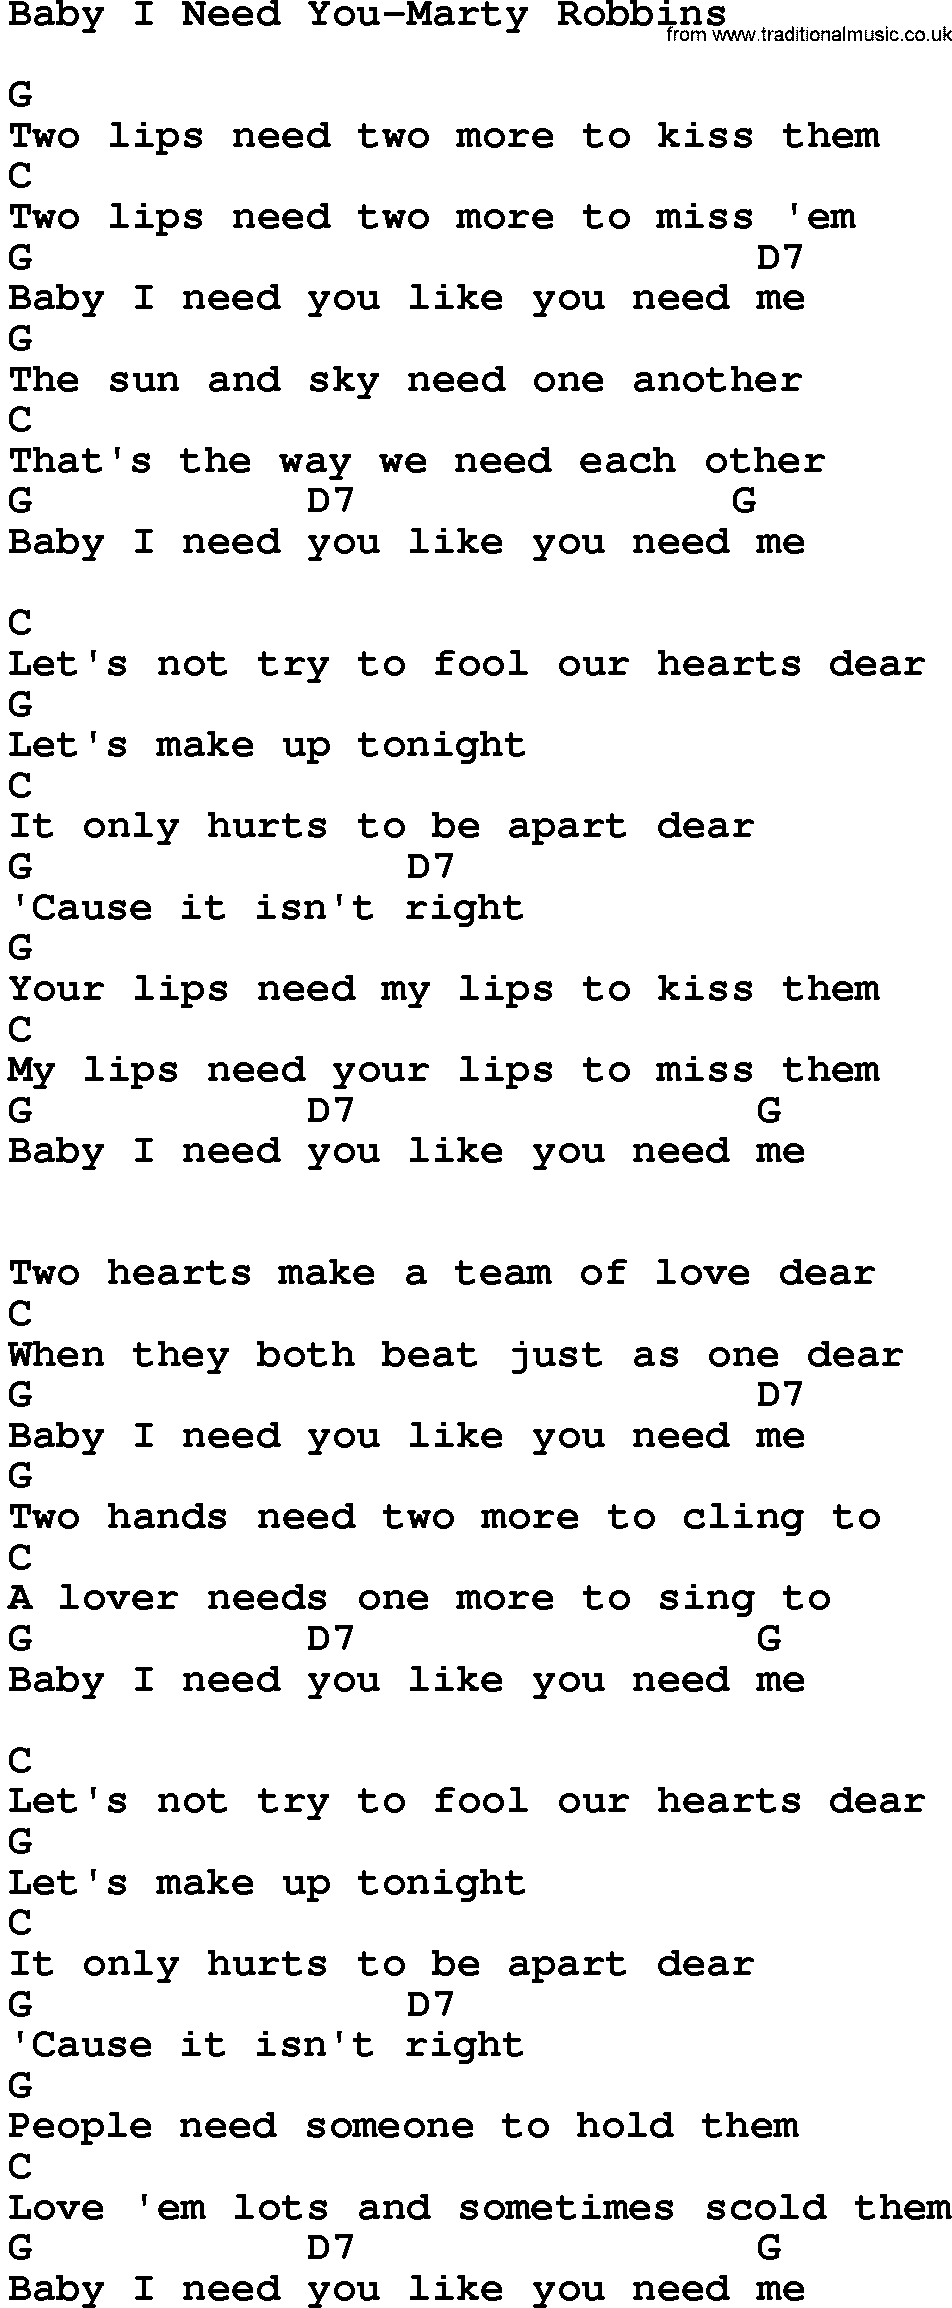 Country Music:Baby I Need You-Marty Robbins Lyrics and Chords